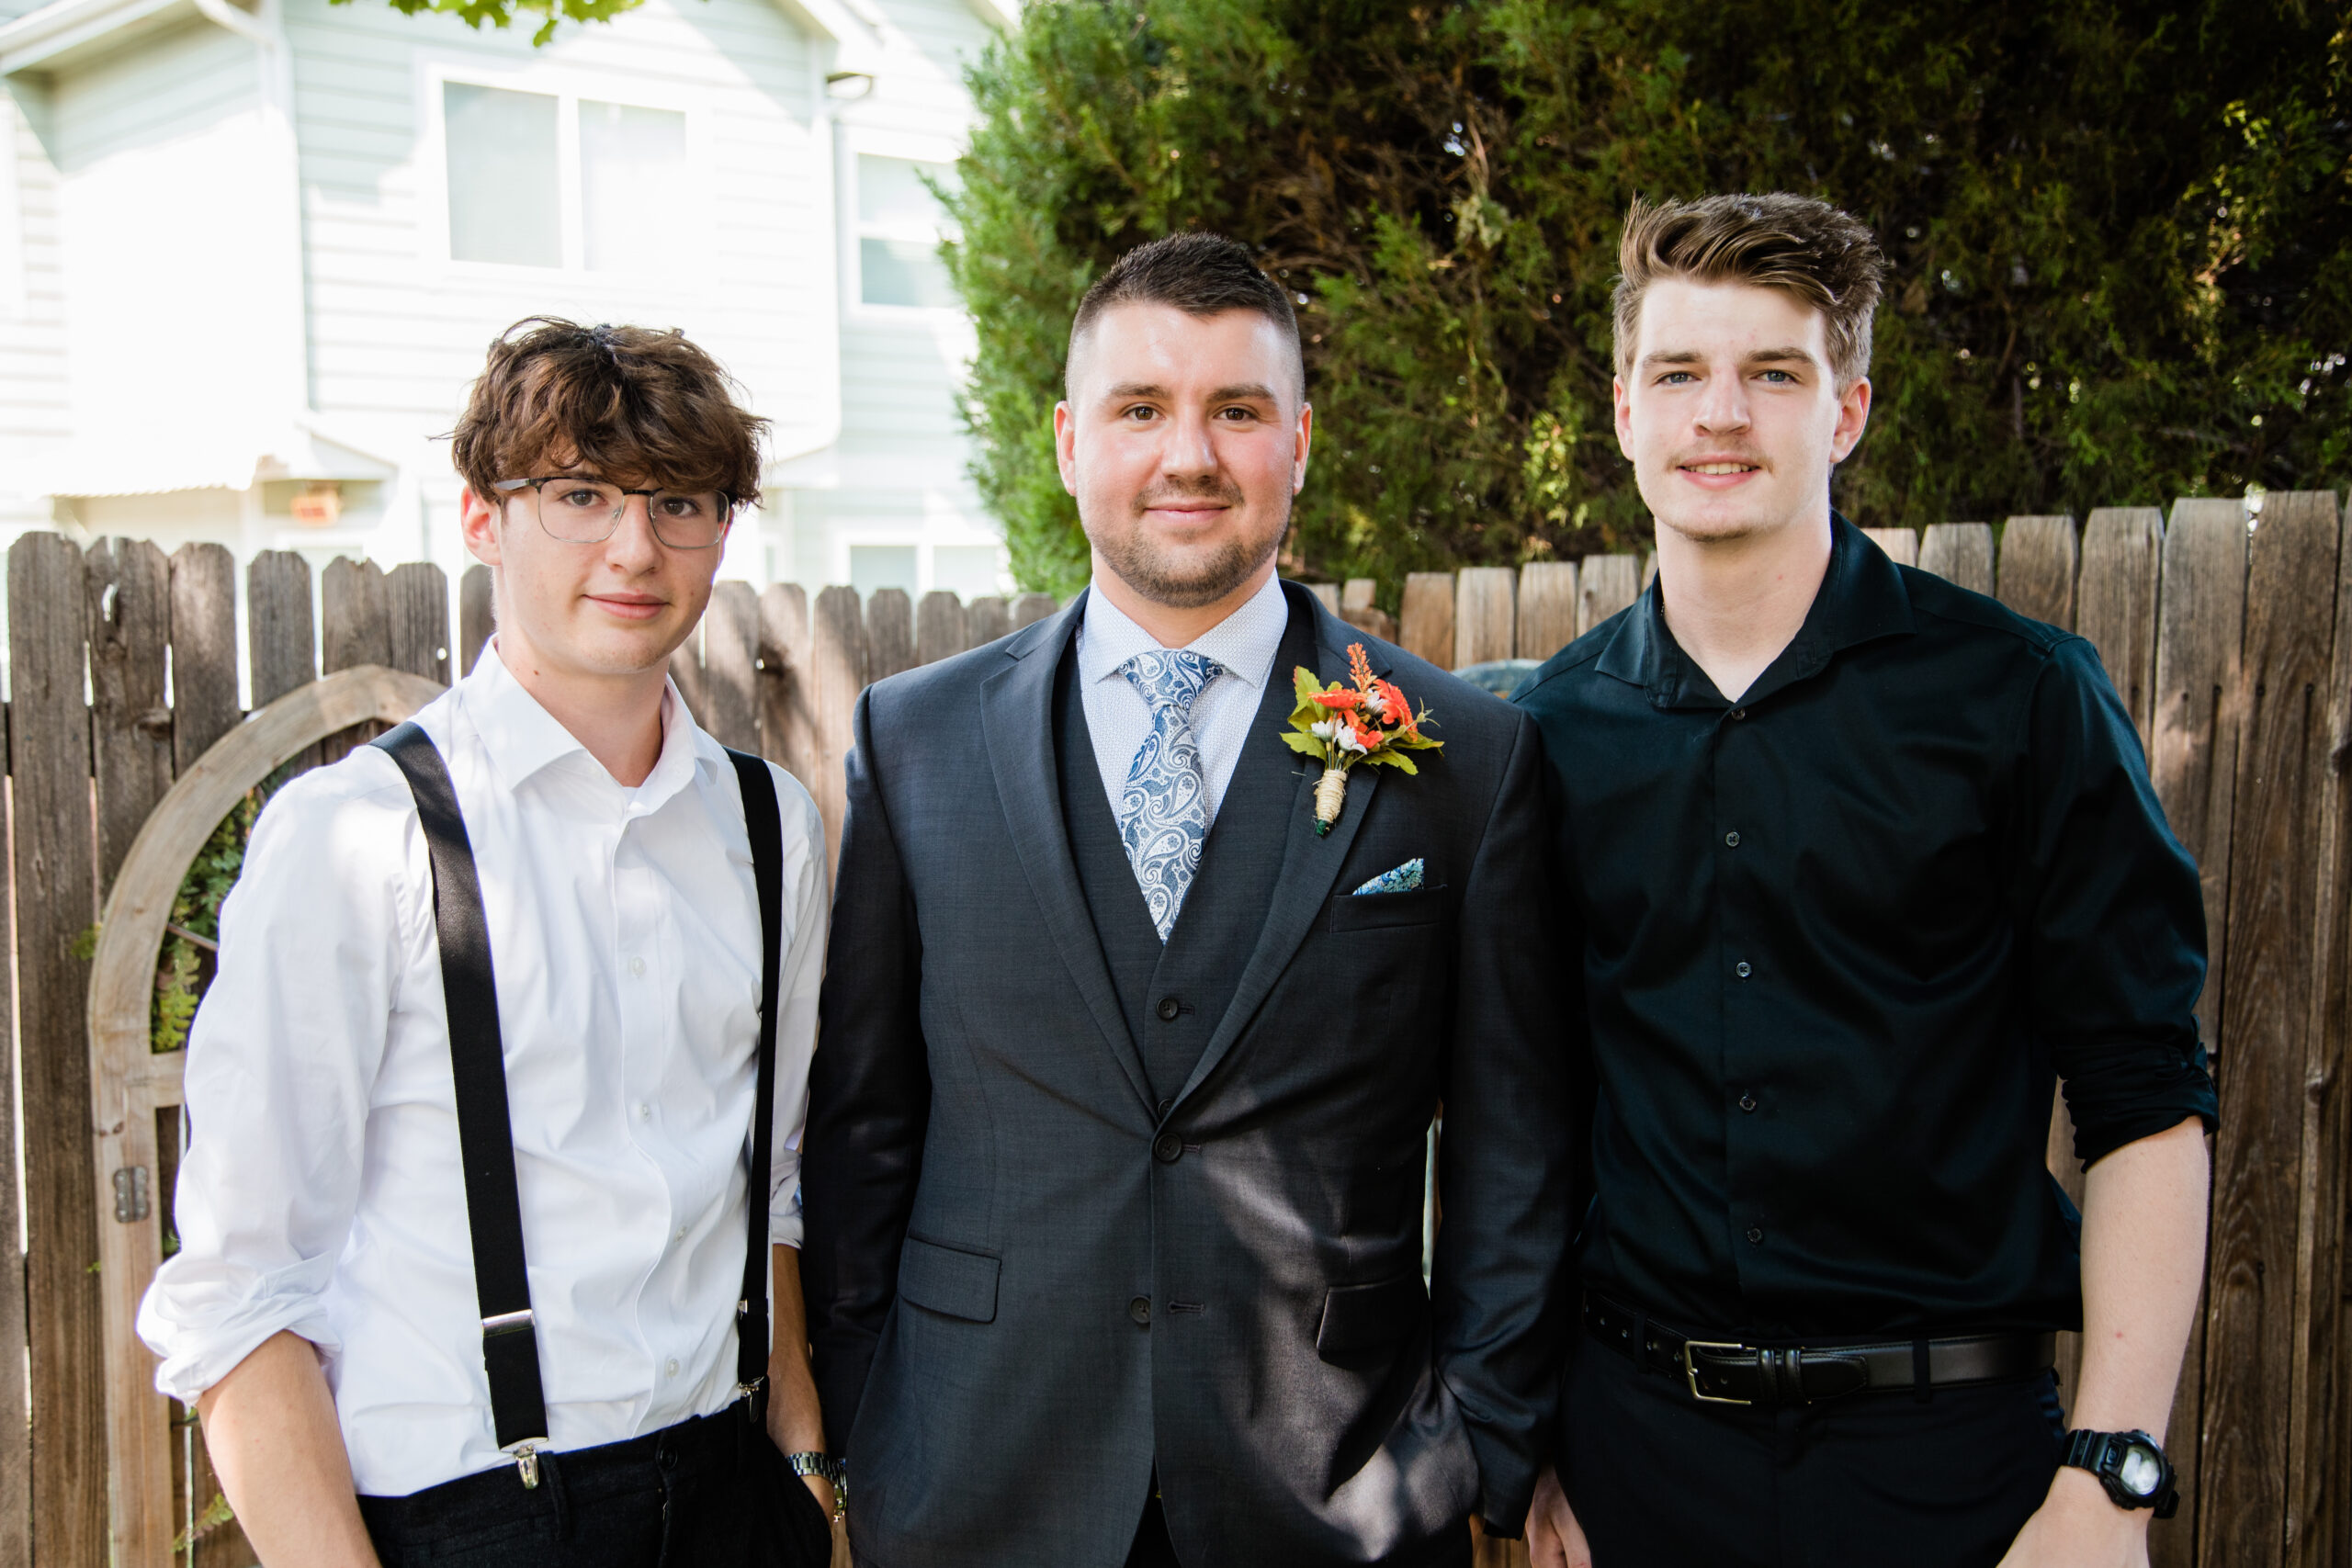 A groom poses with his brothers after his wedding ceremony.